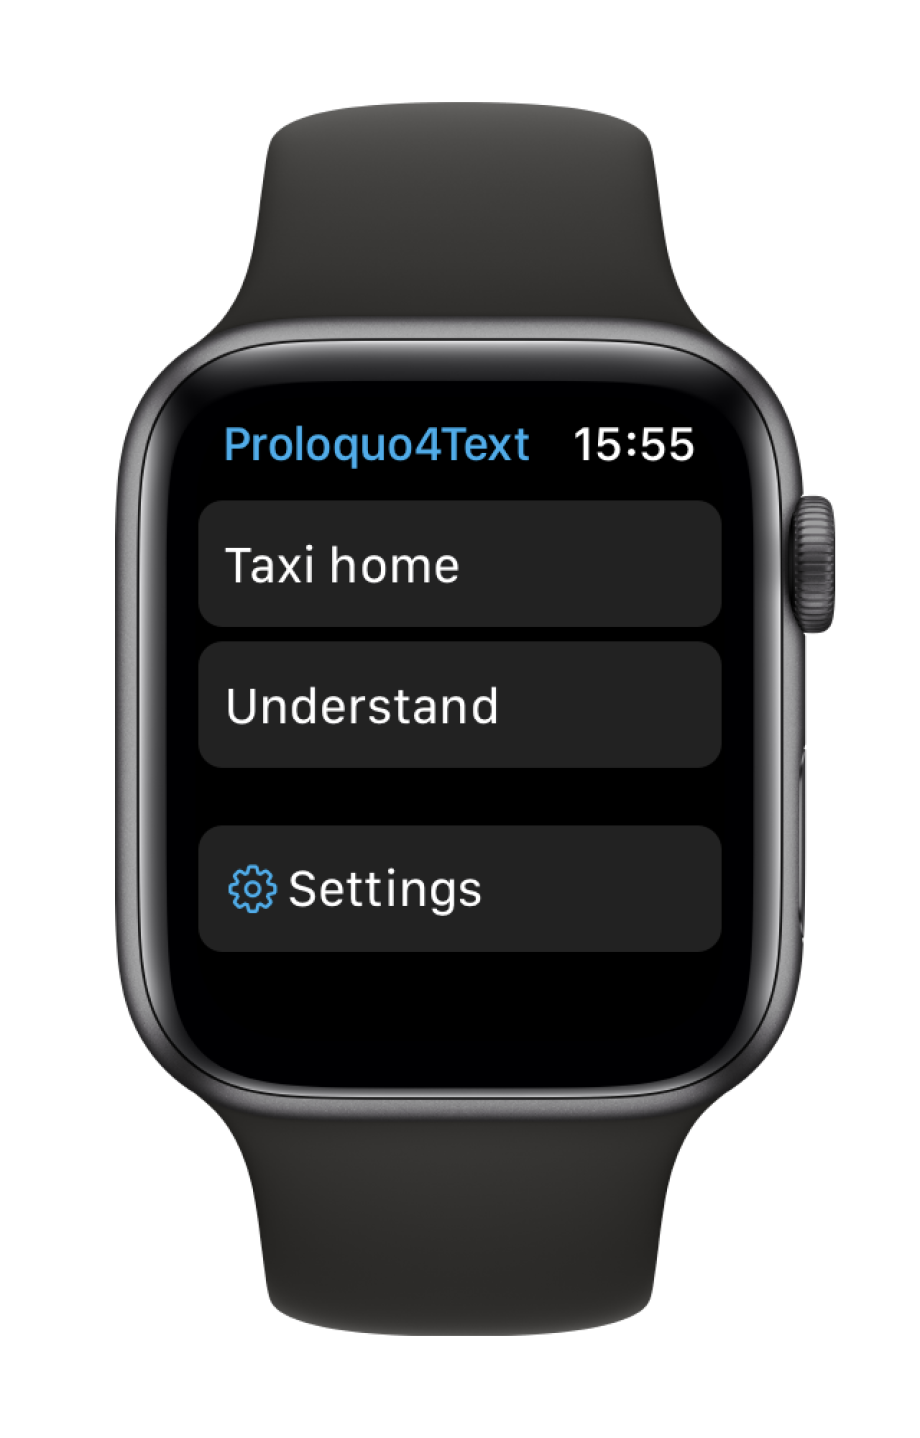 EN Proloquo4 Text Watch Find Settings